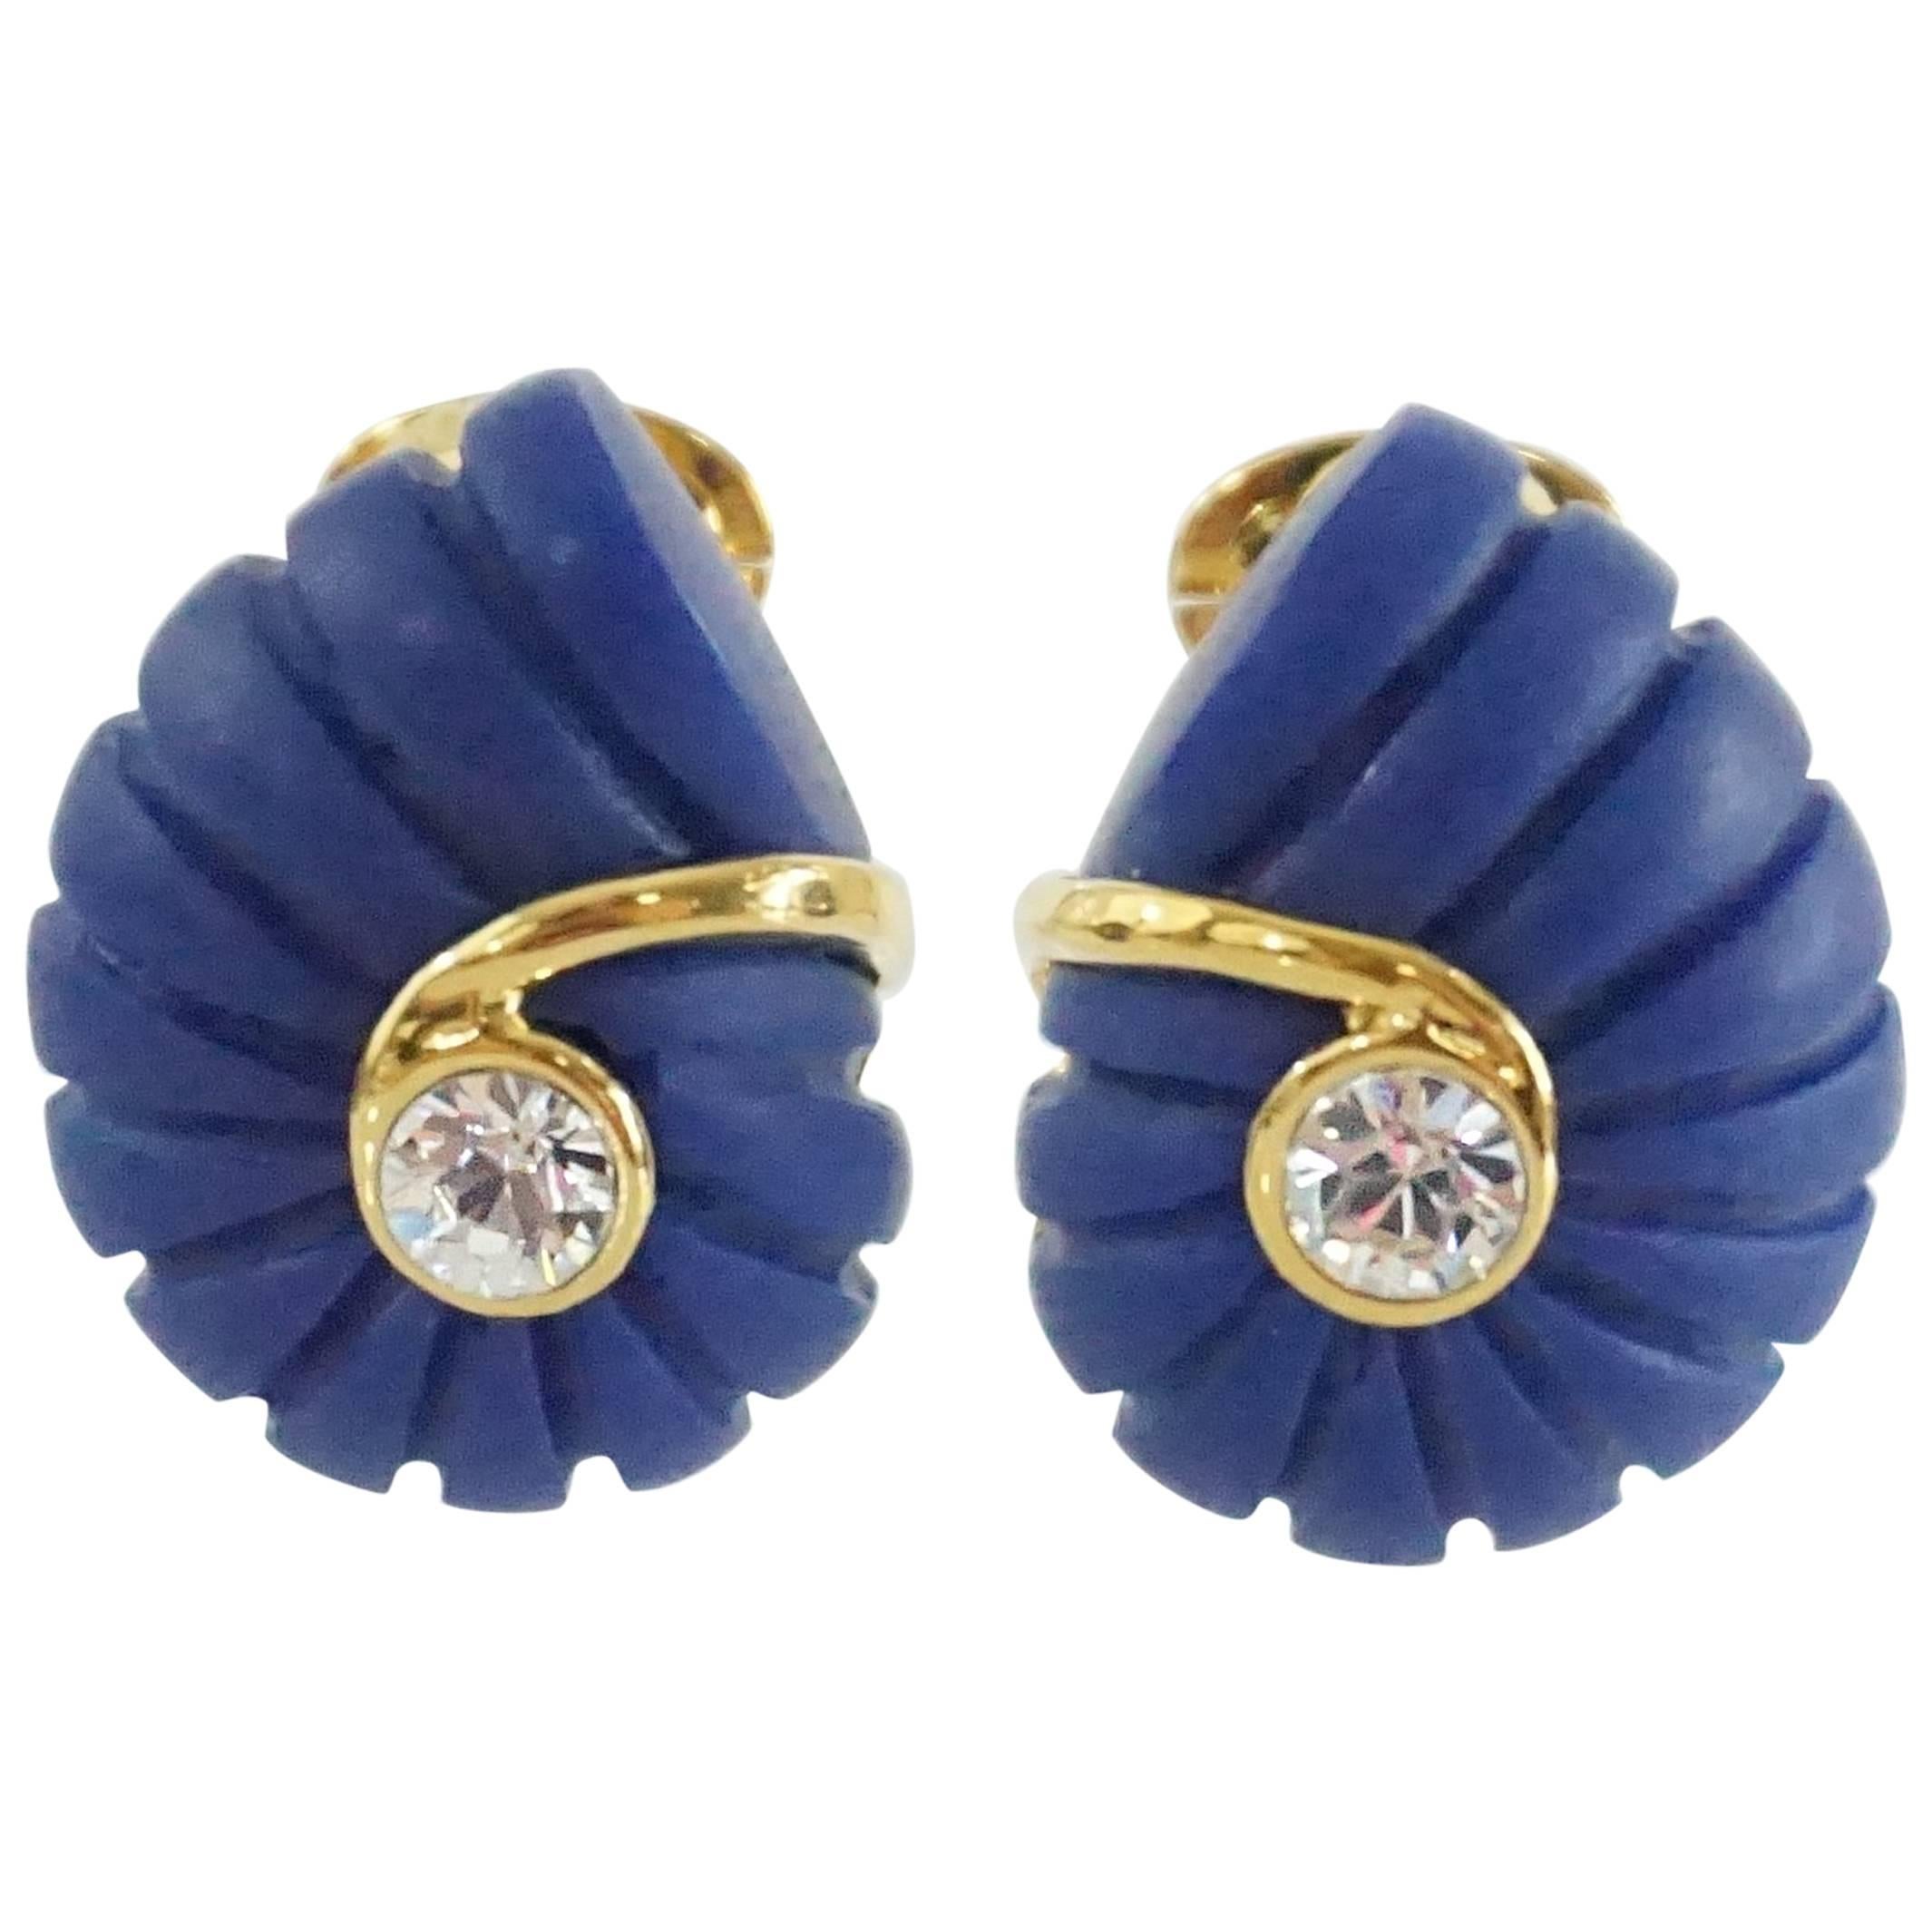 Replica Dark Blue Spiral with Rhinestone and Gold Detailing Clip Earrings